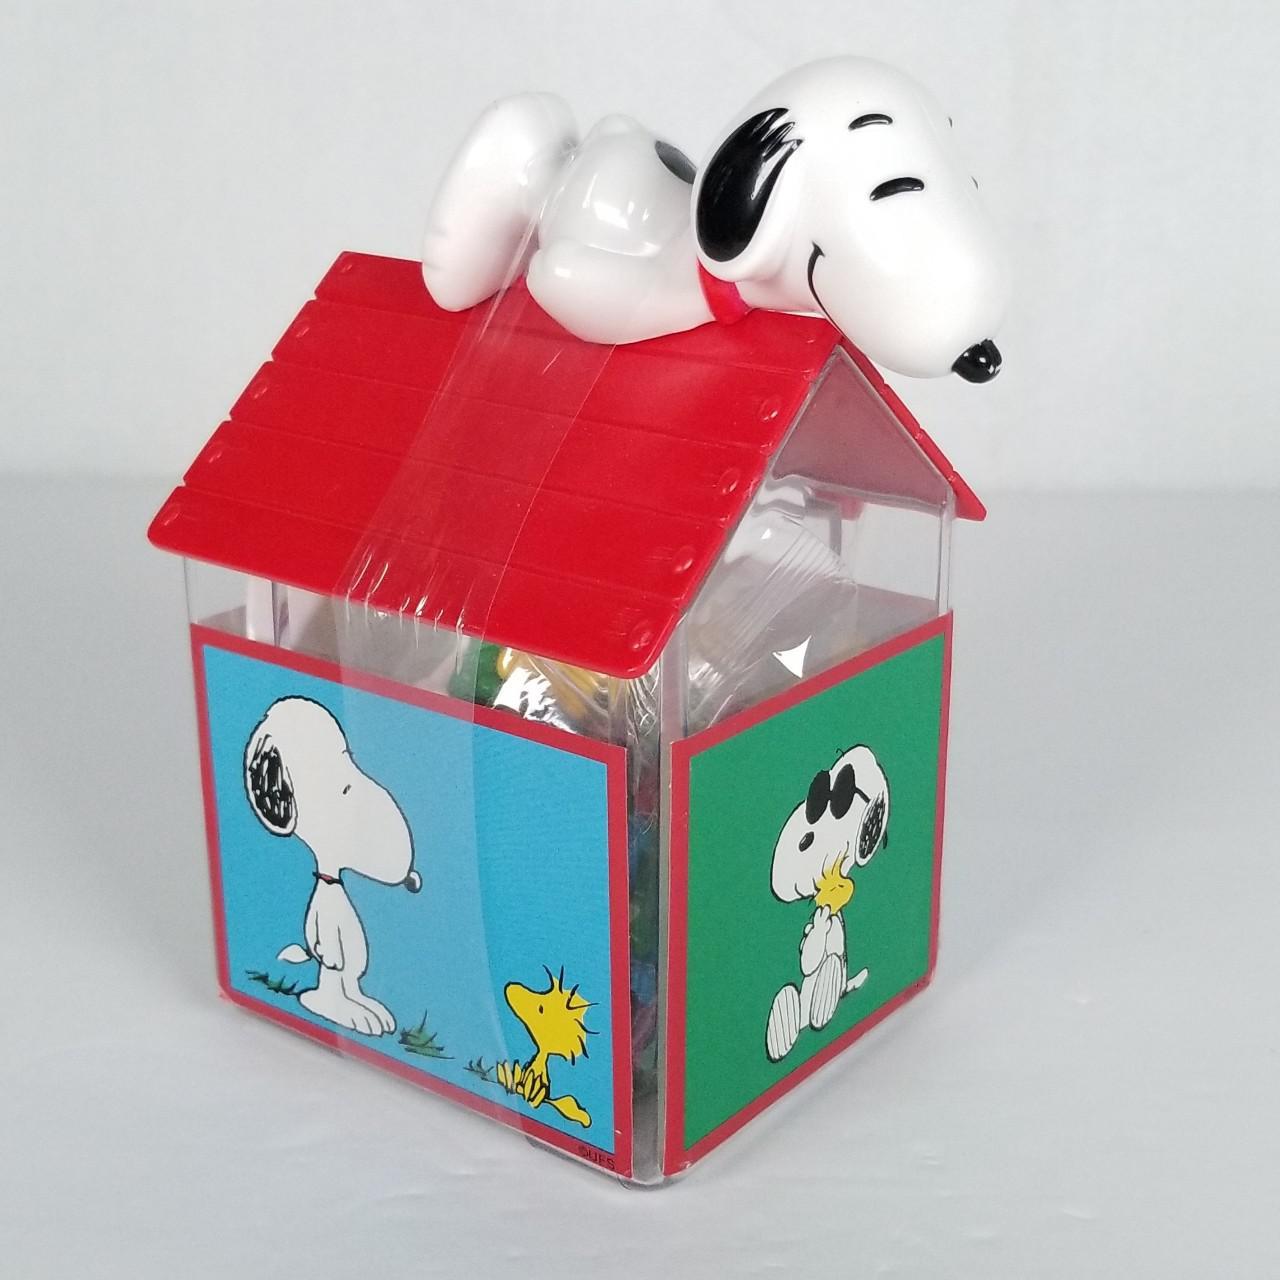 1999 Snoopy Dog House Filled With Candy Bonz, 50th... Depop